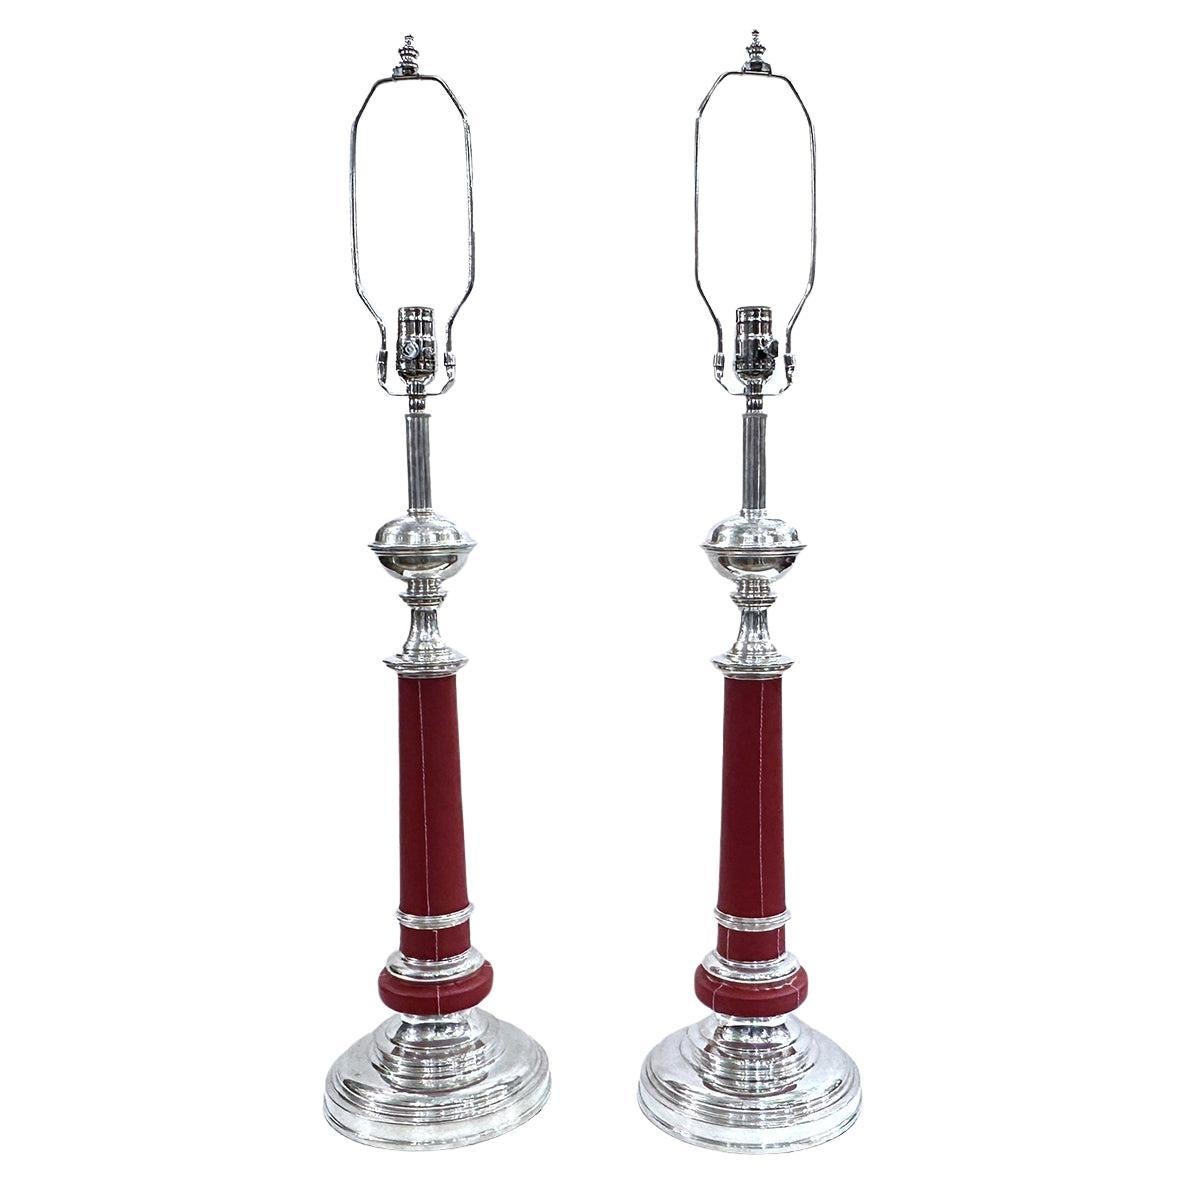 Pair of Midcentury Red Leather Lamps